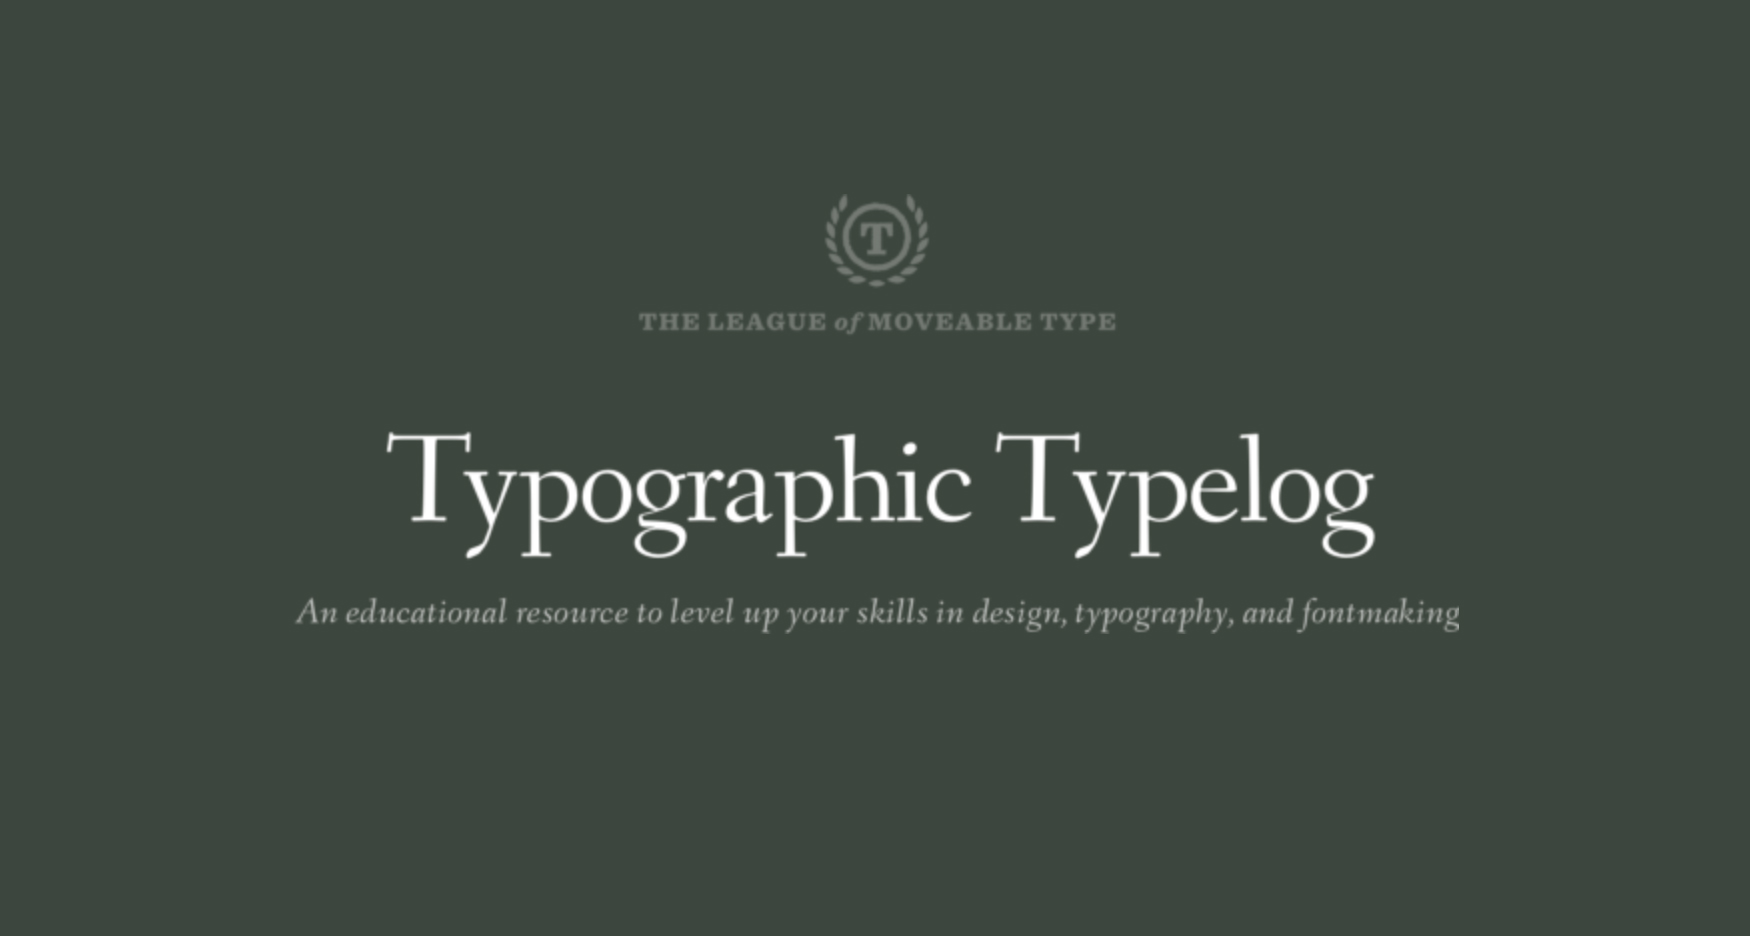 The League of Moveable Type